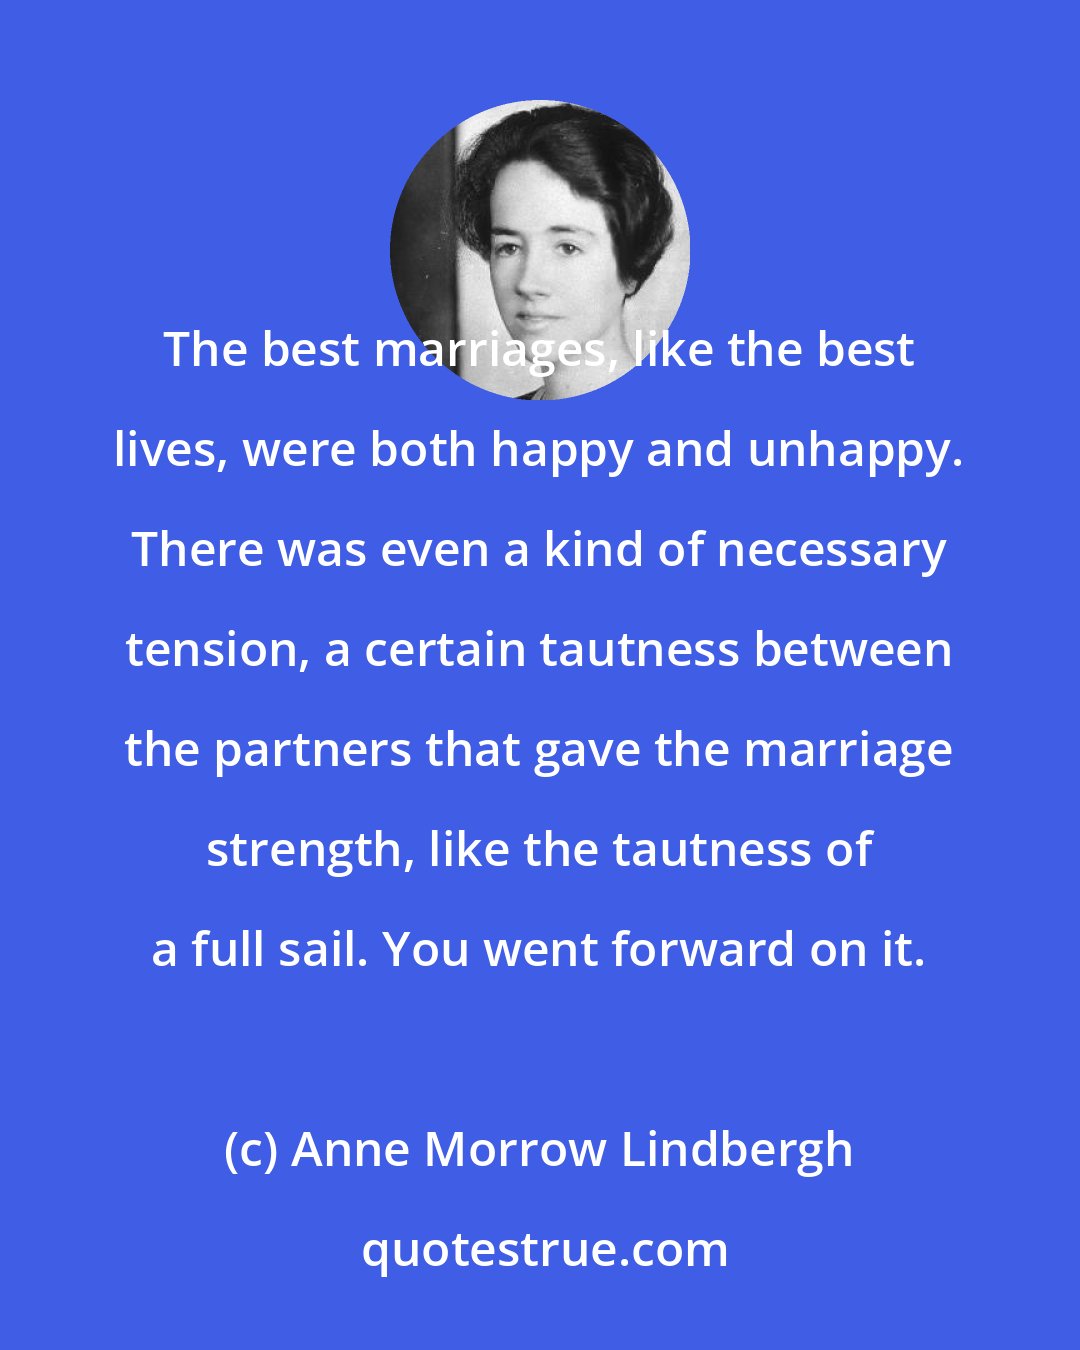 Anne Morrow Lindbergh: The best marriages, like the best lives, were both happy and unhappy. There was even a kind of necessary tension, a certain tautness between the partners that gave the marriage strength, like the tautness of a full sail. You went forward on it.